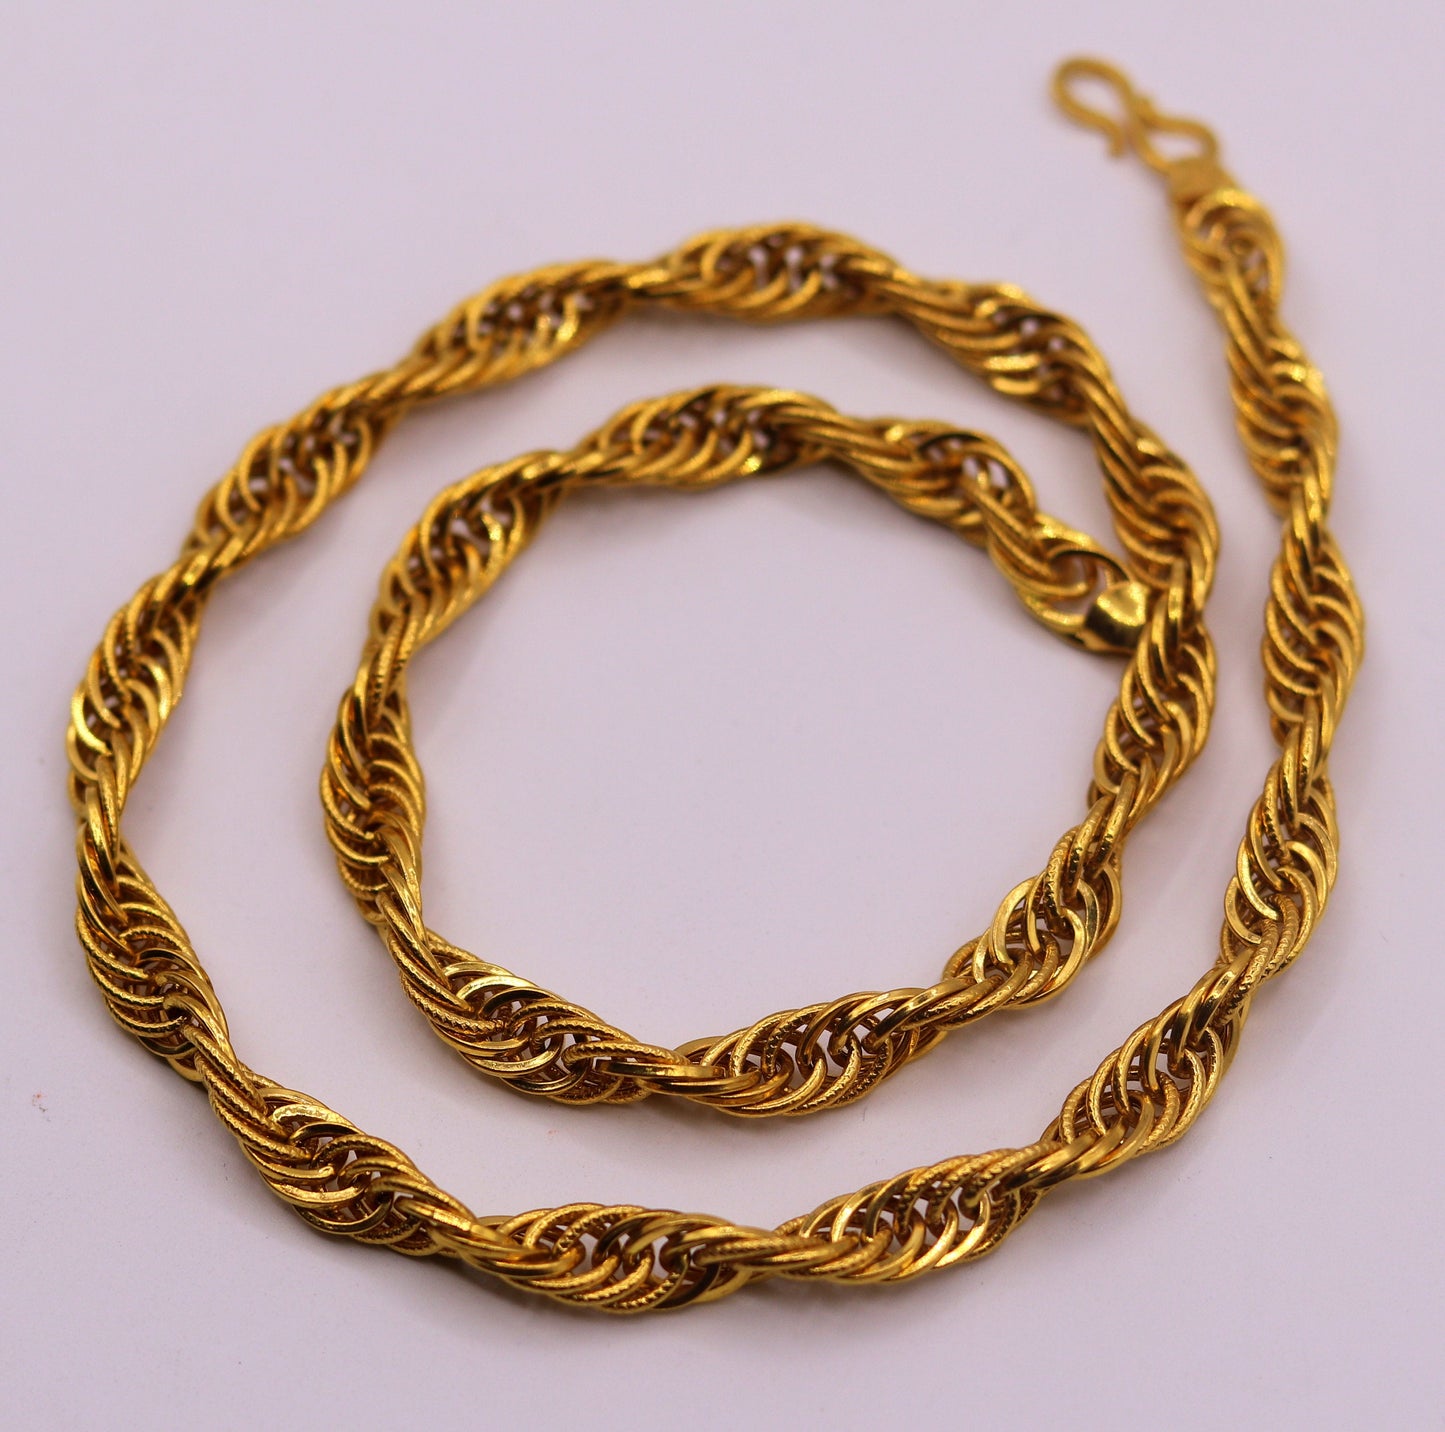 22kt yellow gold handmade fabulous certified gold link chain twisted design necklace unisex gifting jewelry from india - TRIBAL ORNAMENTS